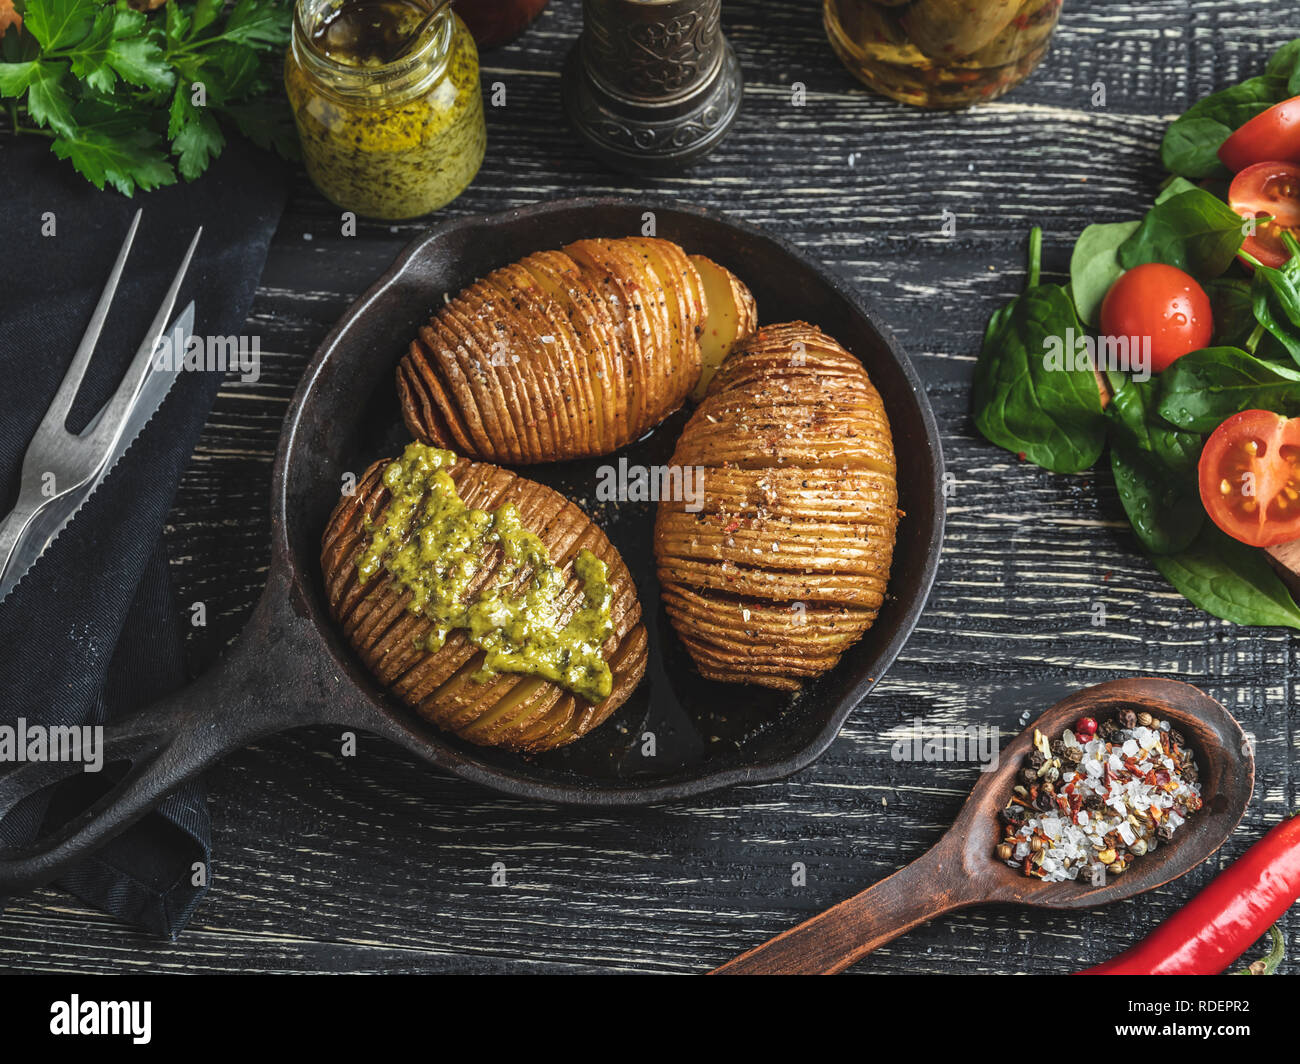 Homemade baked roasted potatoes wholly in skin, salad. Cast iron pan on the table Stock Photo